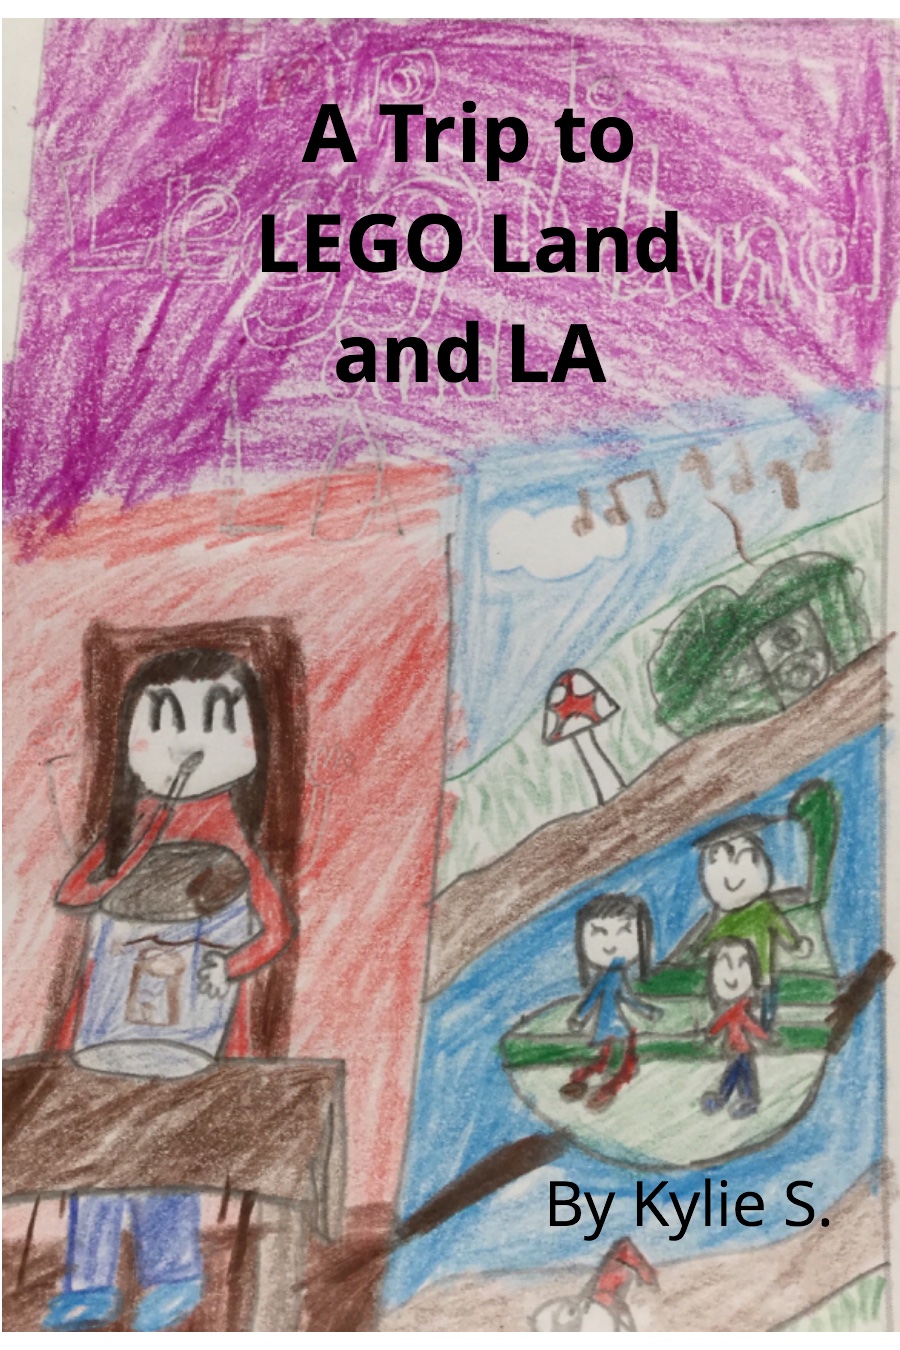 A Trip to Lego Land and LA by Kylie S